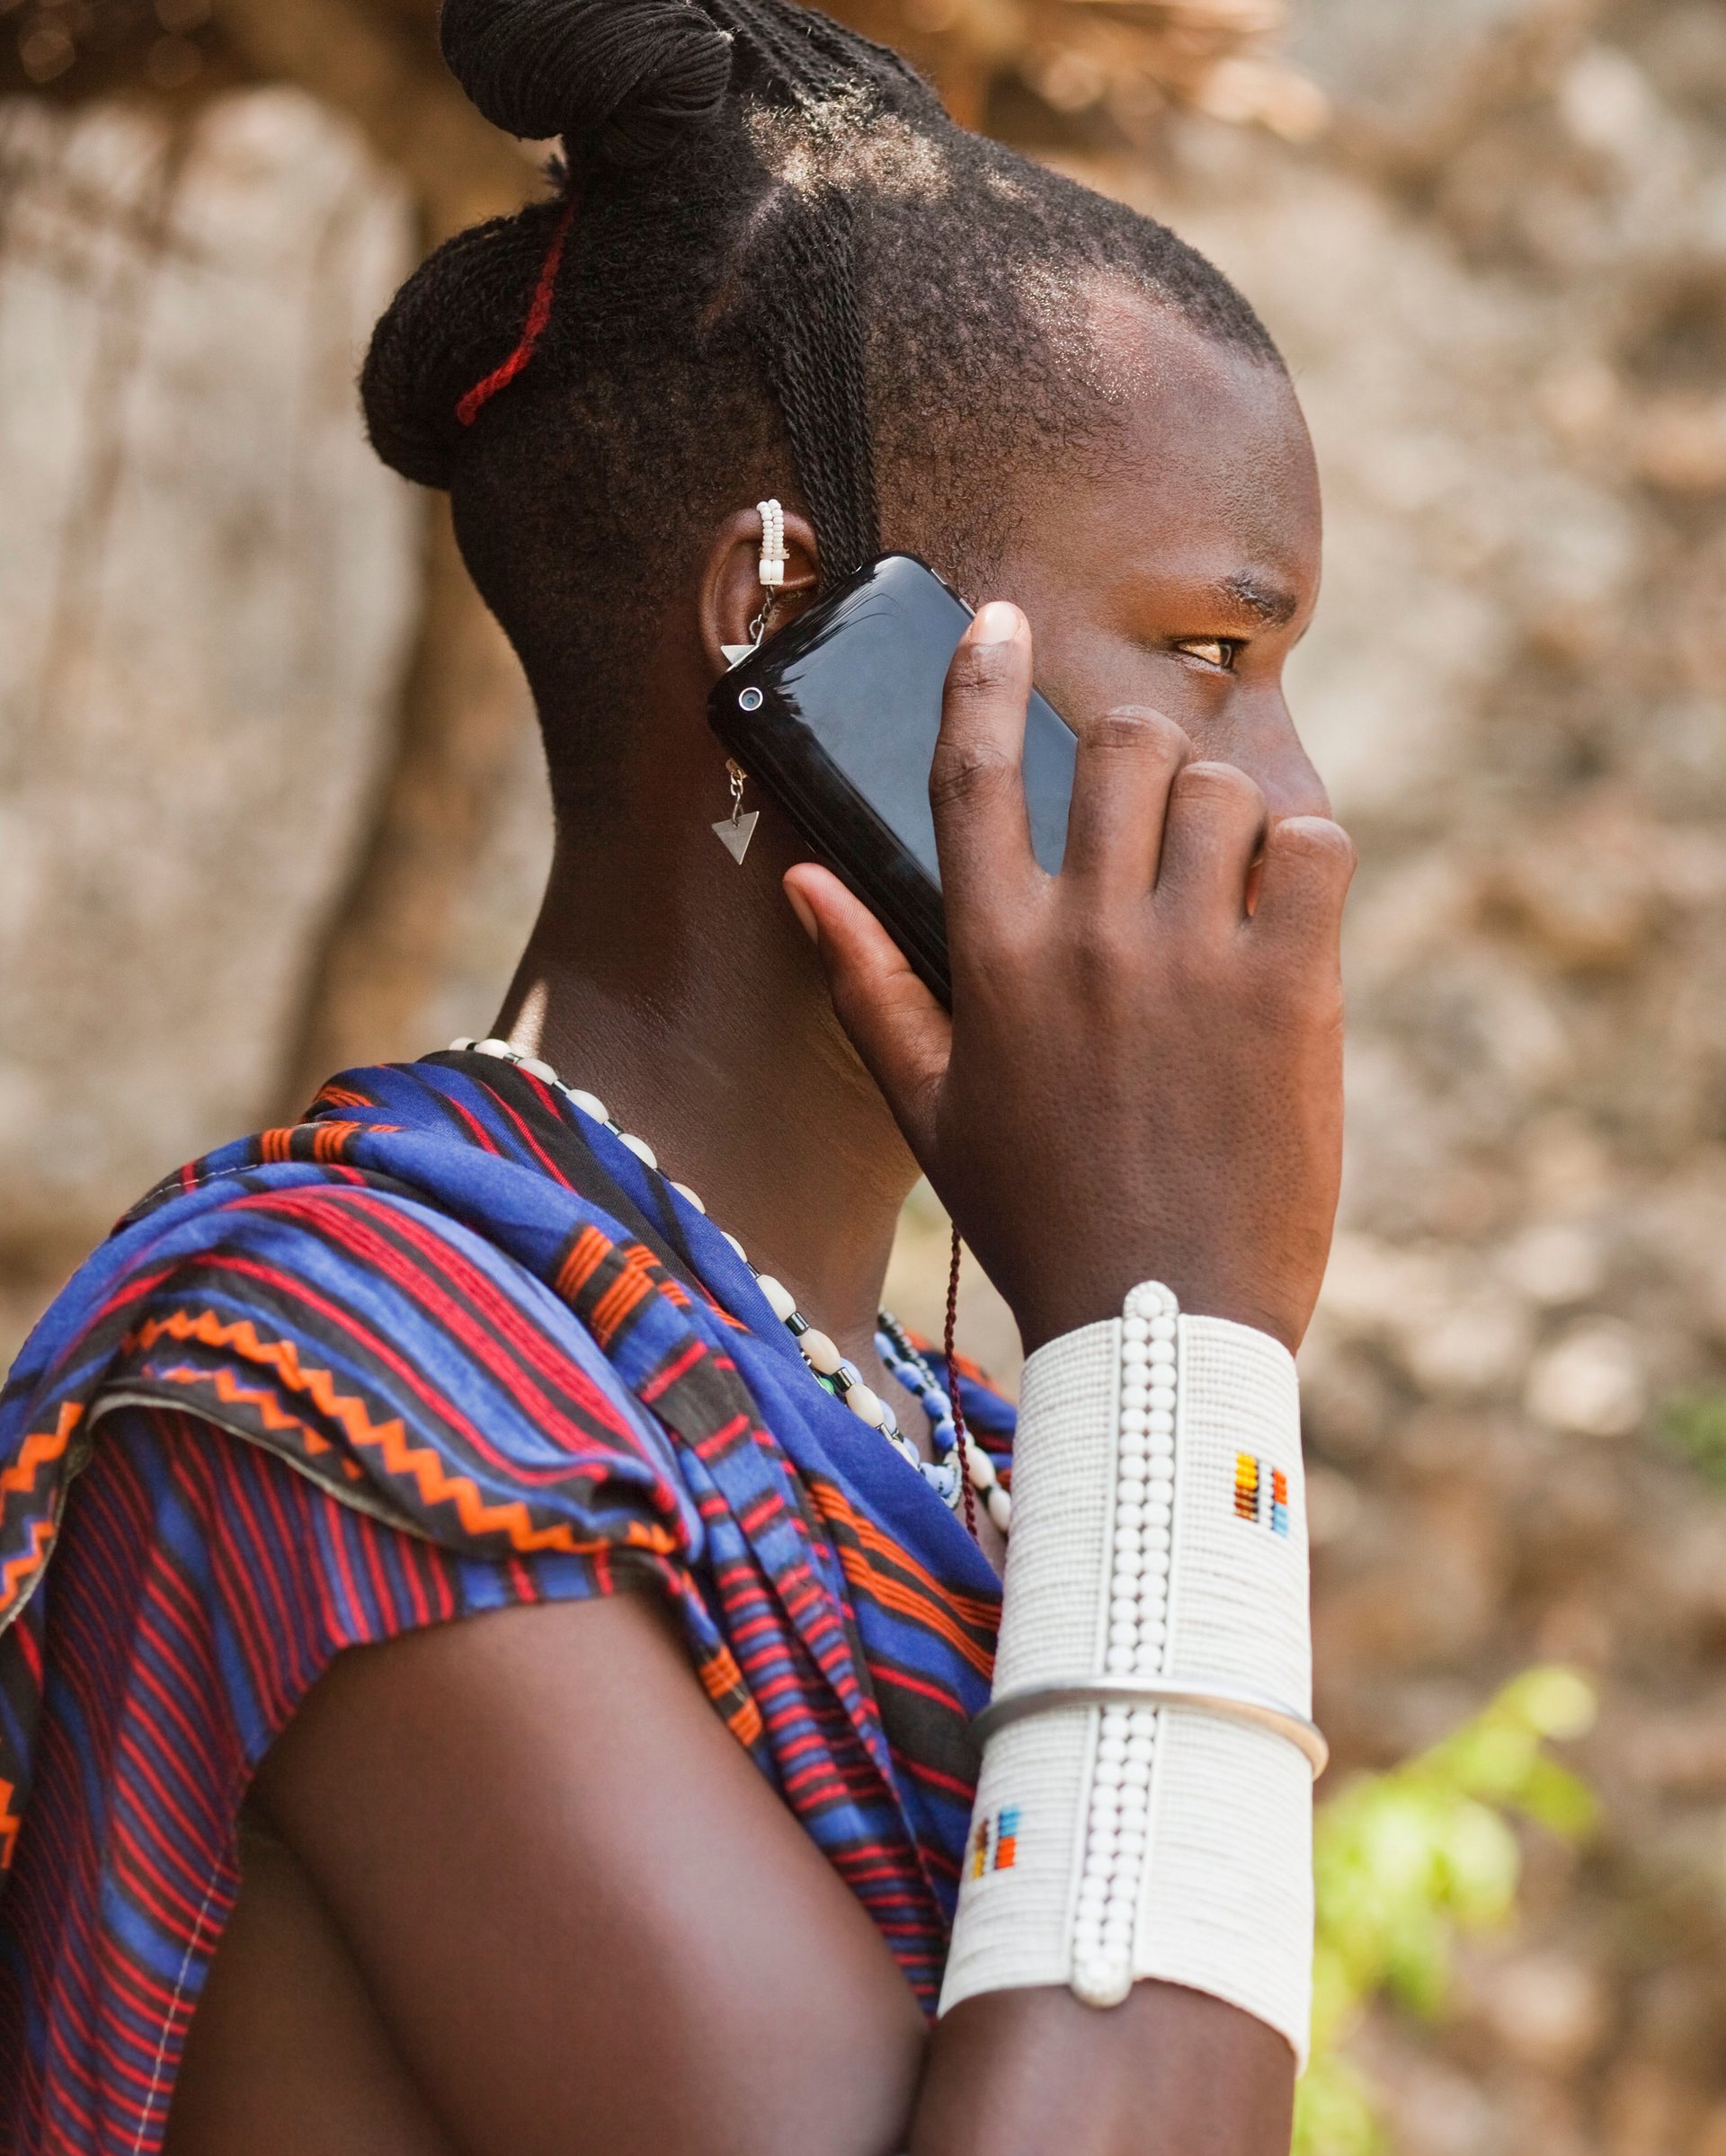 A Maasai man in traditional dress using a smartphone. Photograph: Age fotostock/Alamy